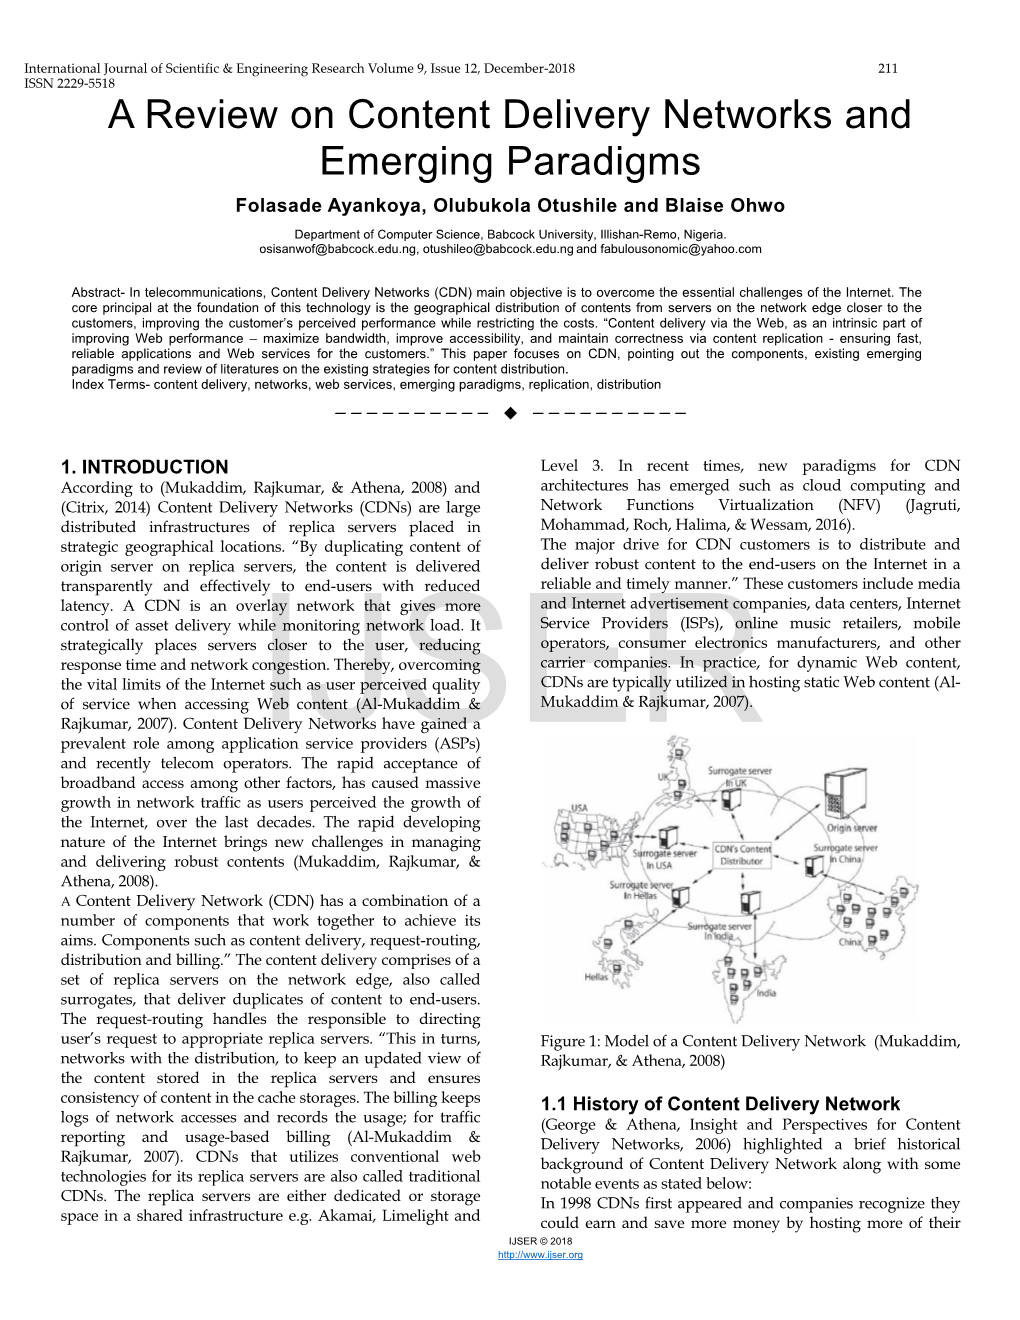 A Review on Content Delivery Networks and Emerging Paradigms